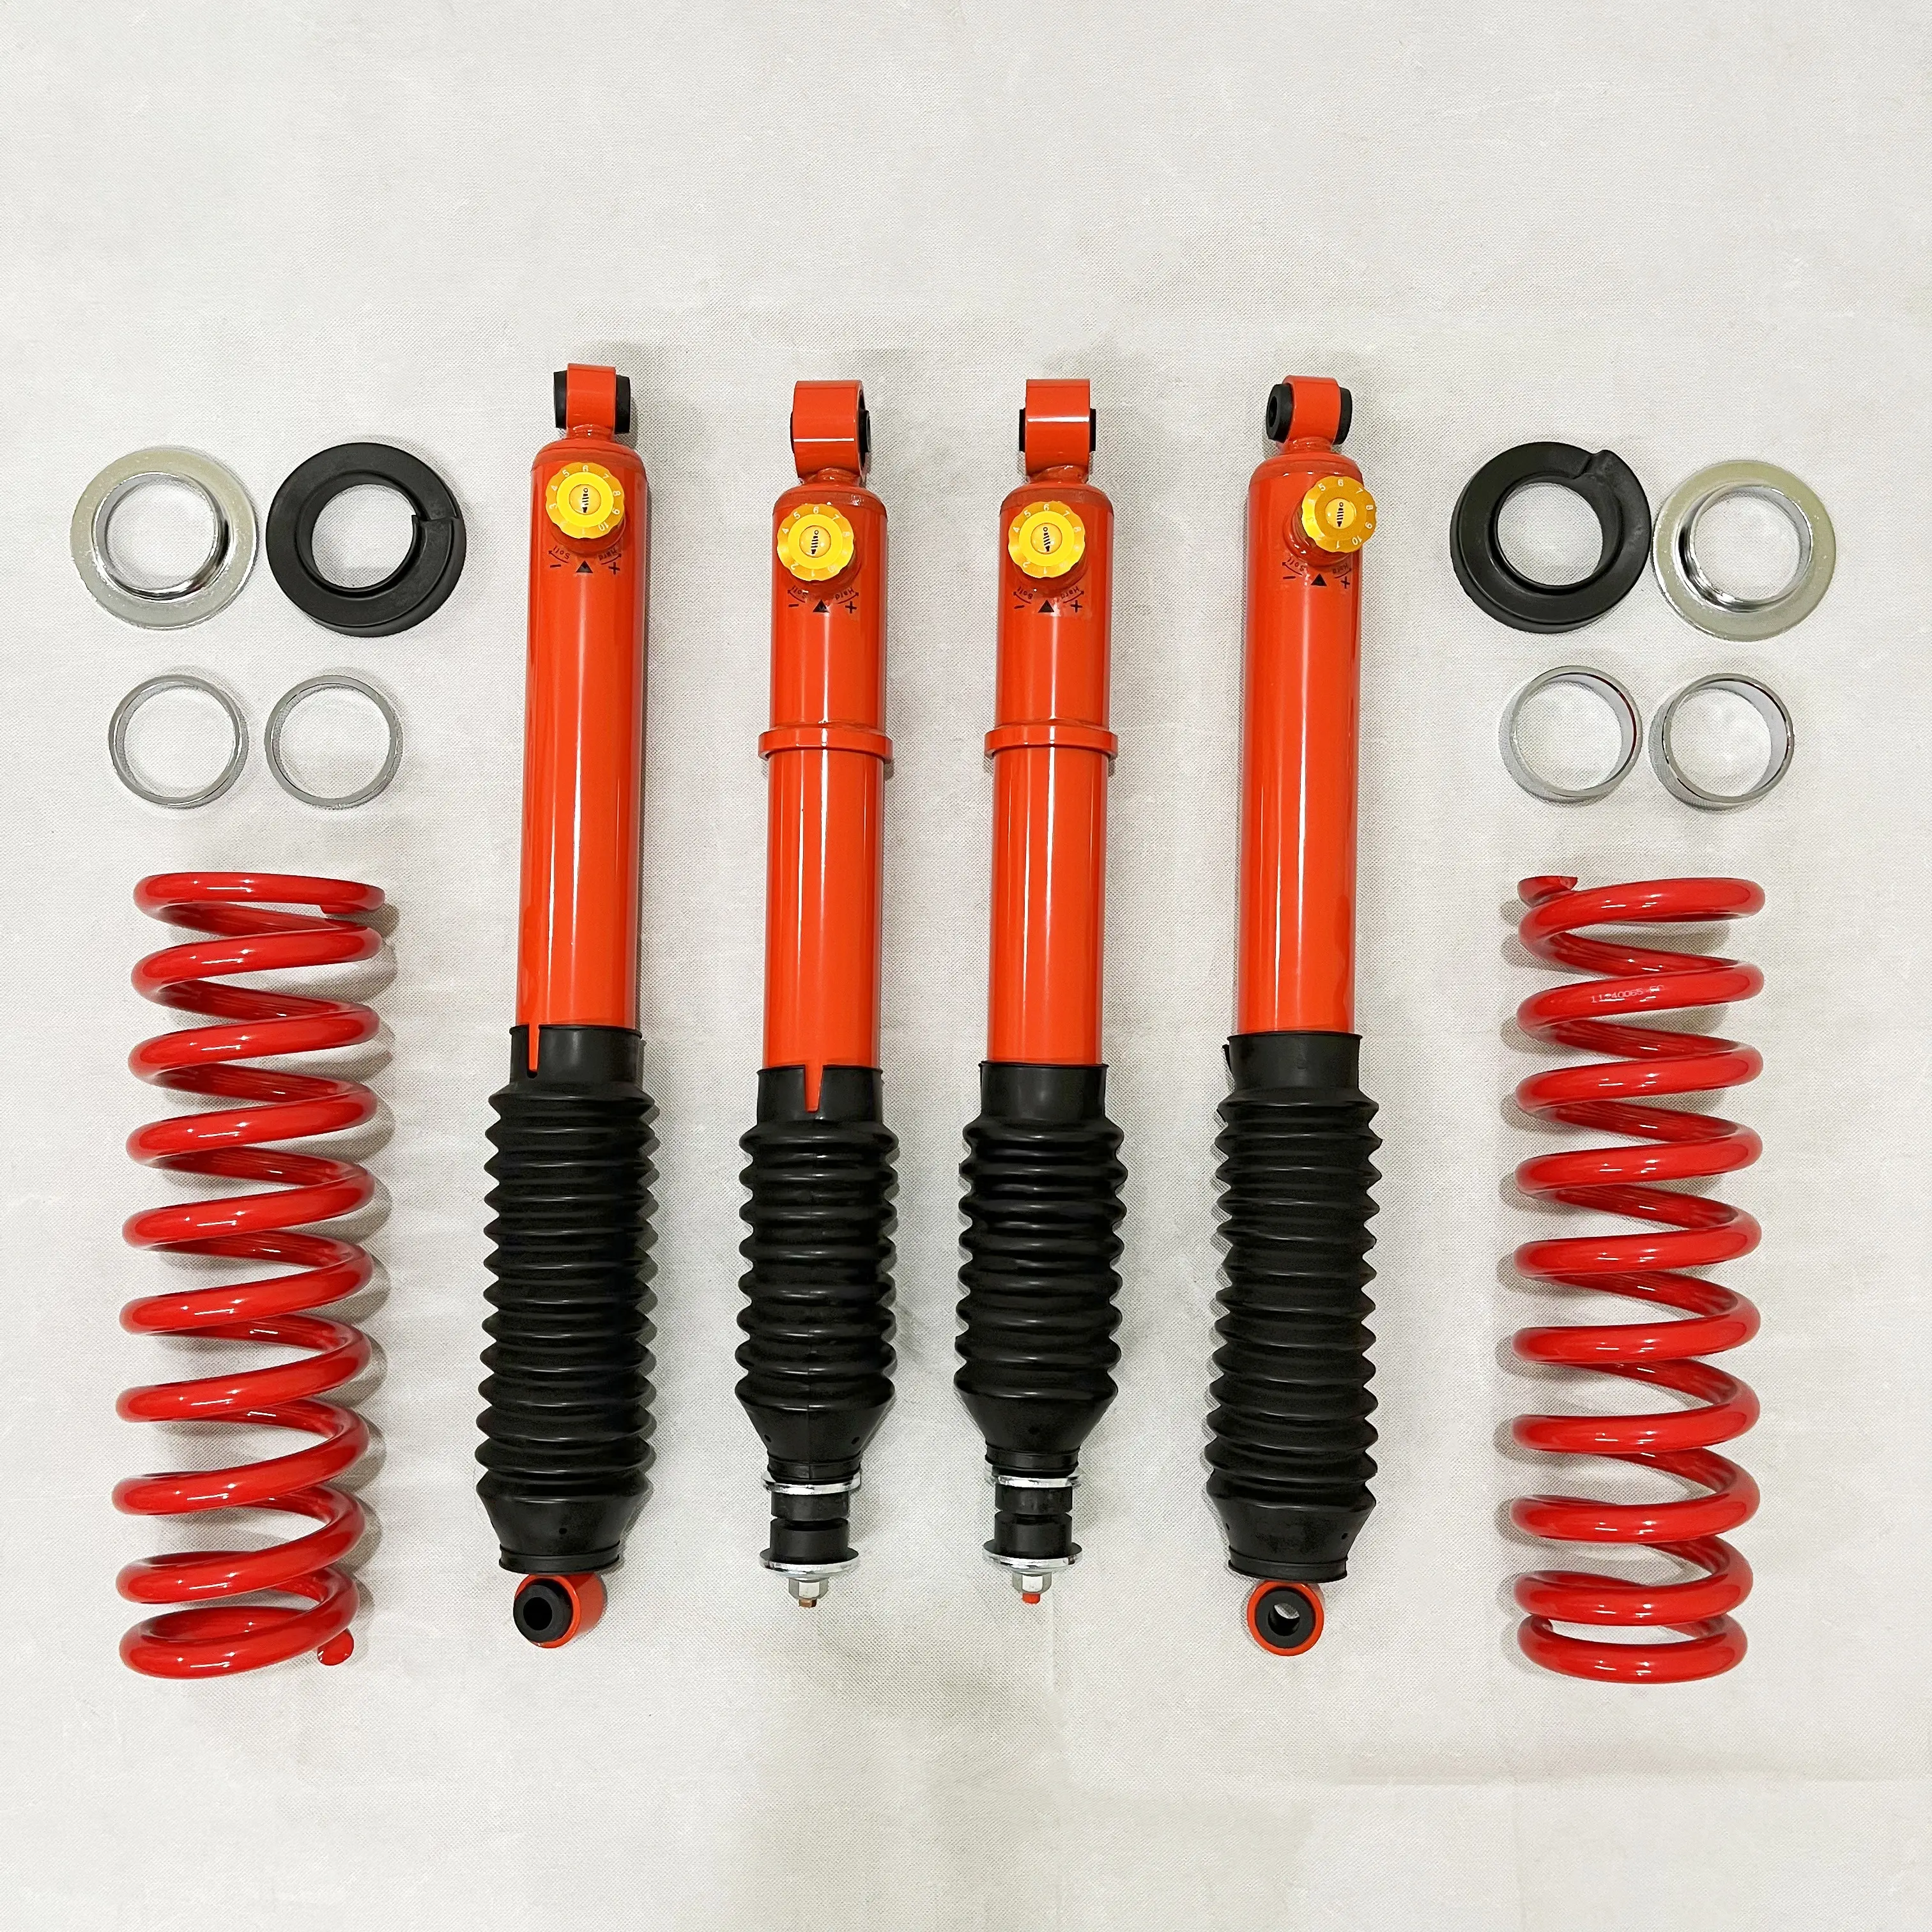 High quality automotive suspension parts Off-road Adjustable 4x4 Shock Absorber Coil Spring 2 Inch Lift Kit For D-max